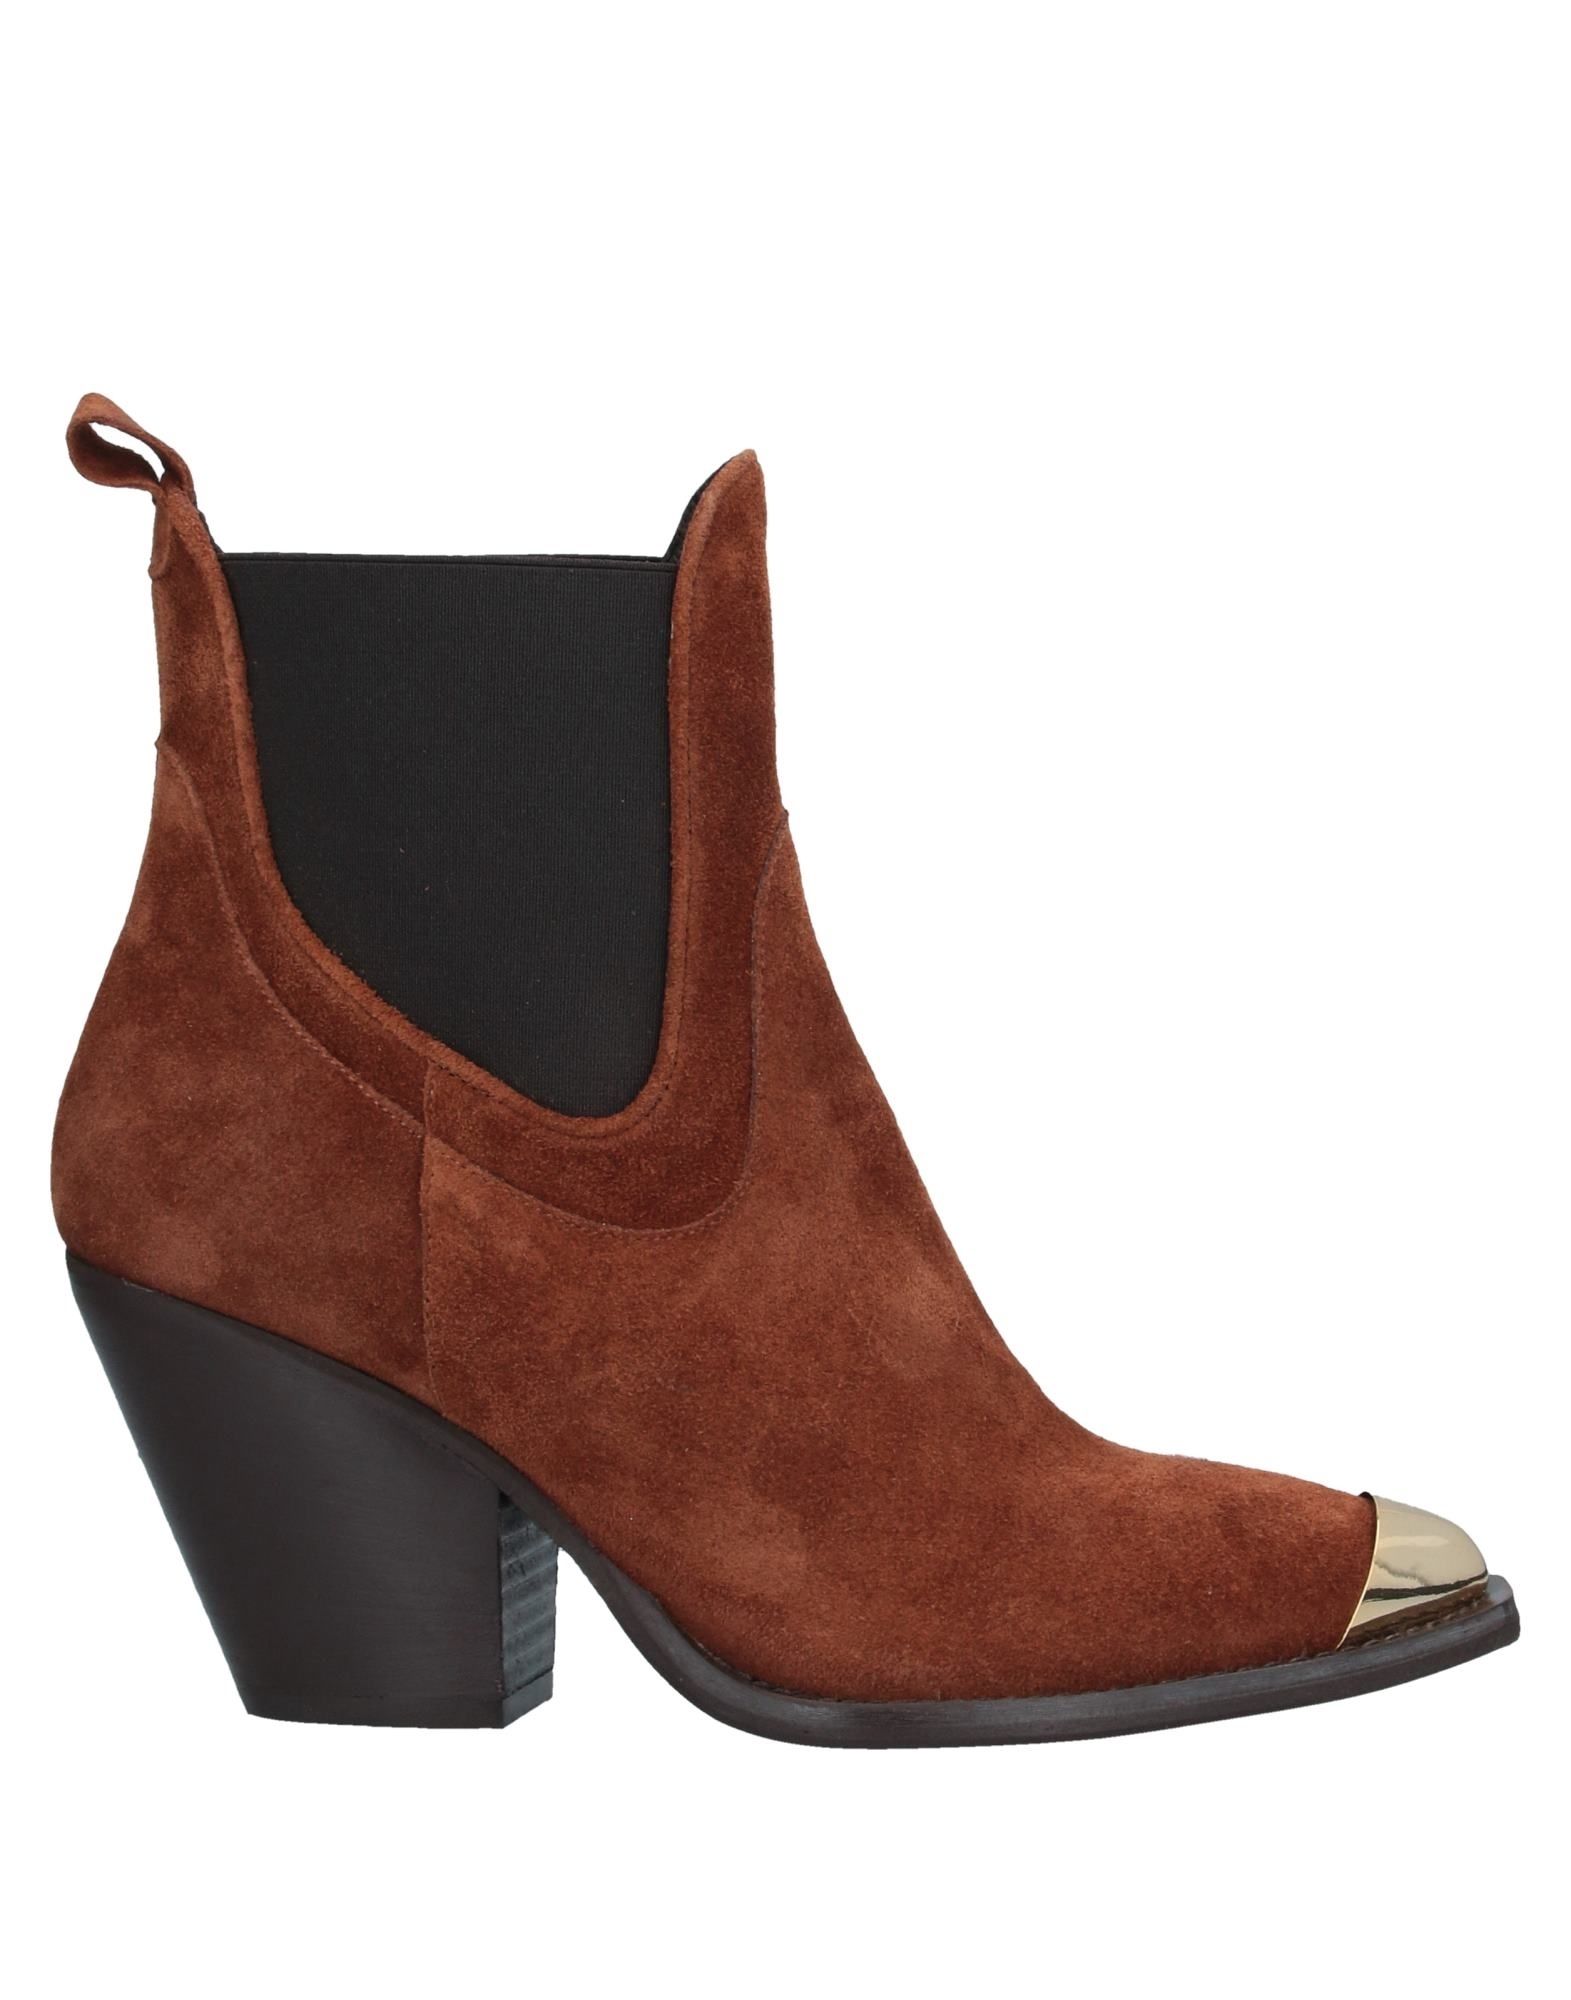 OVYE' by CRISTINA LUCCHI Ankle boots | SheFinds